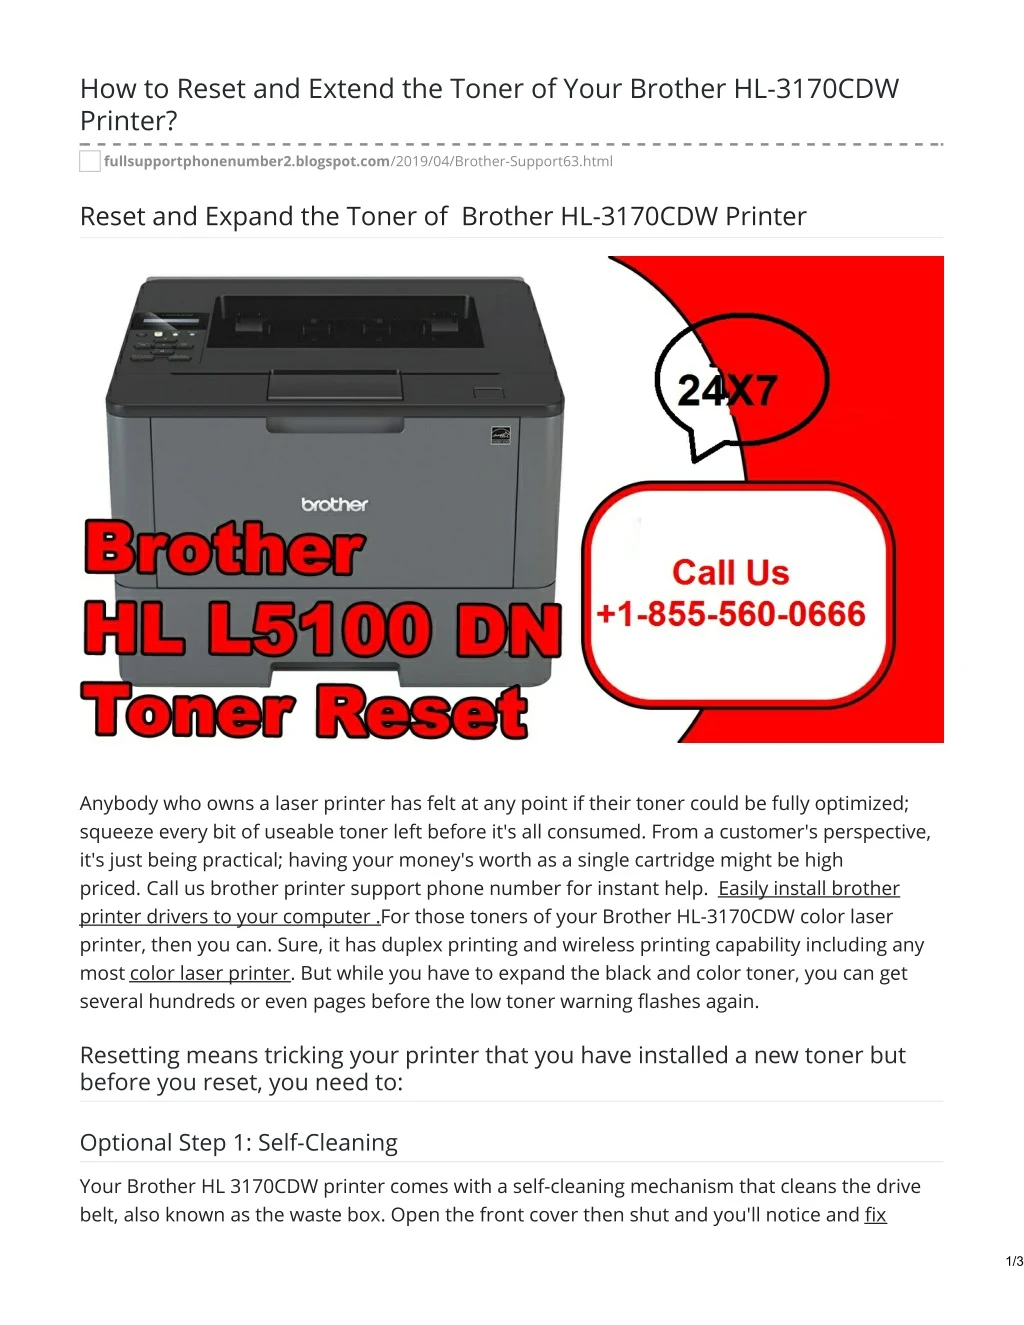 how to reset and extend the toner of your brother